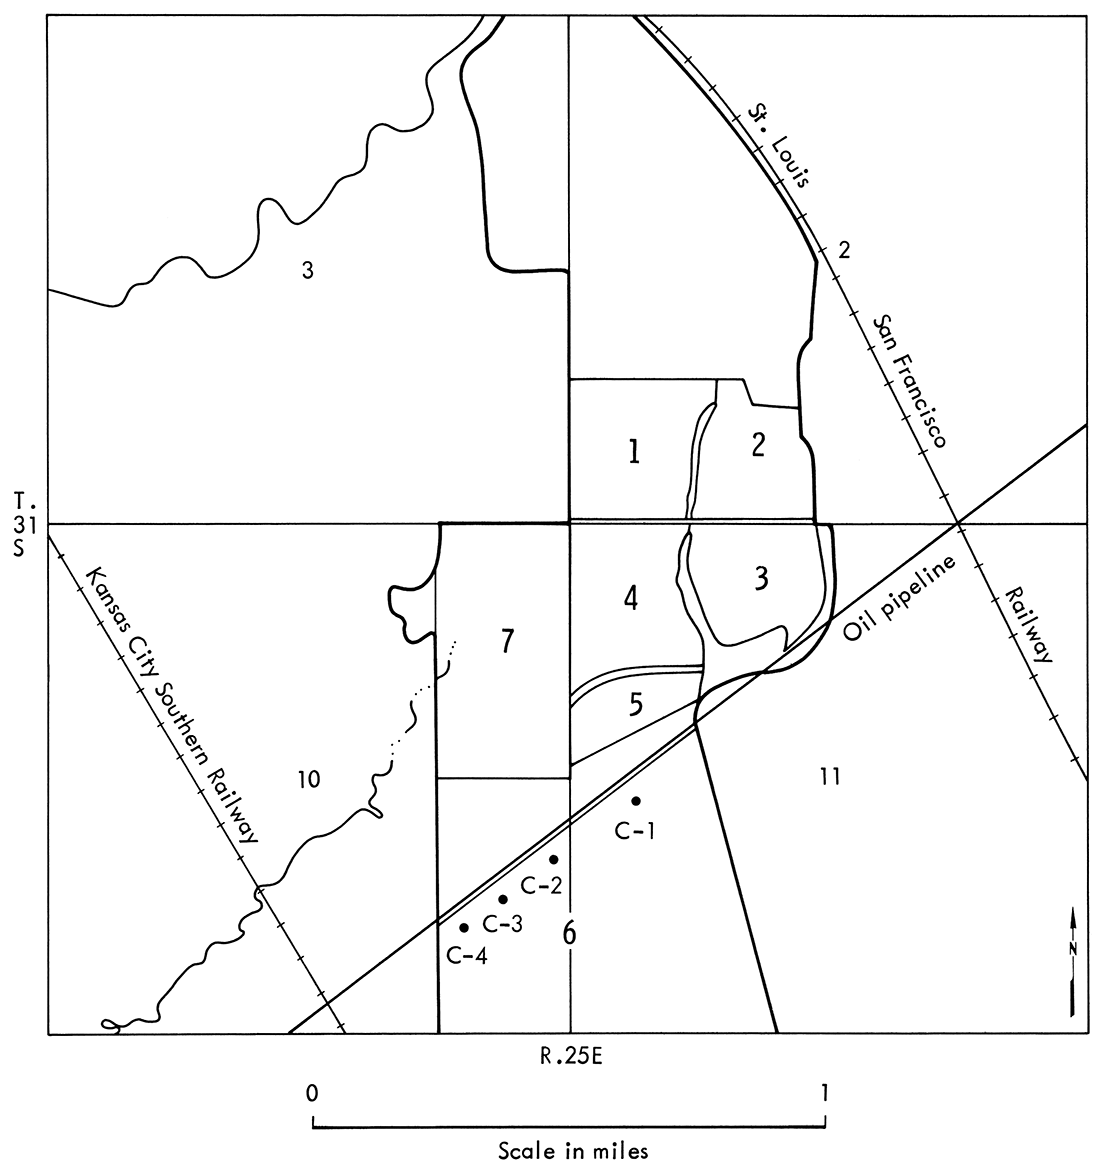 Map of location of rock-core sampling sites.